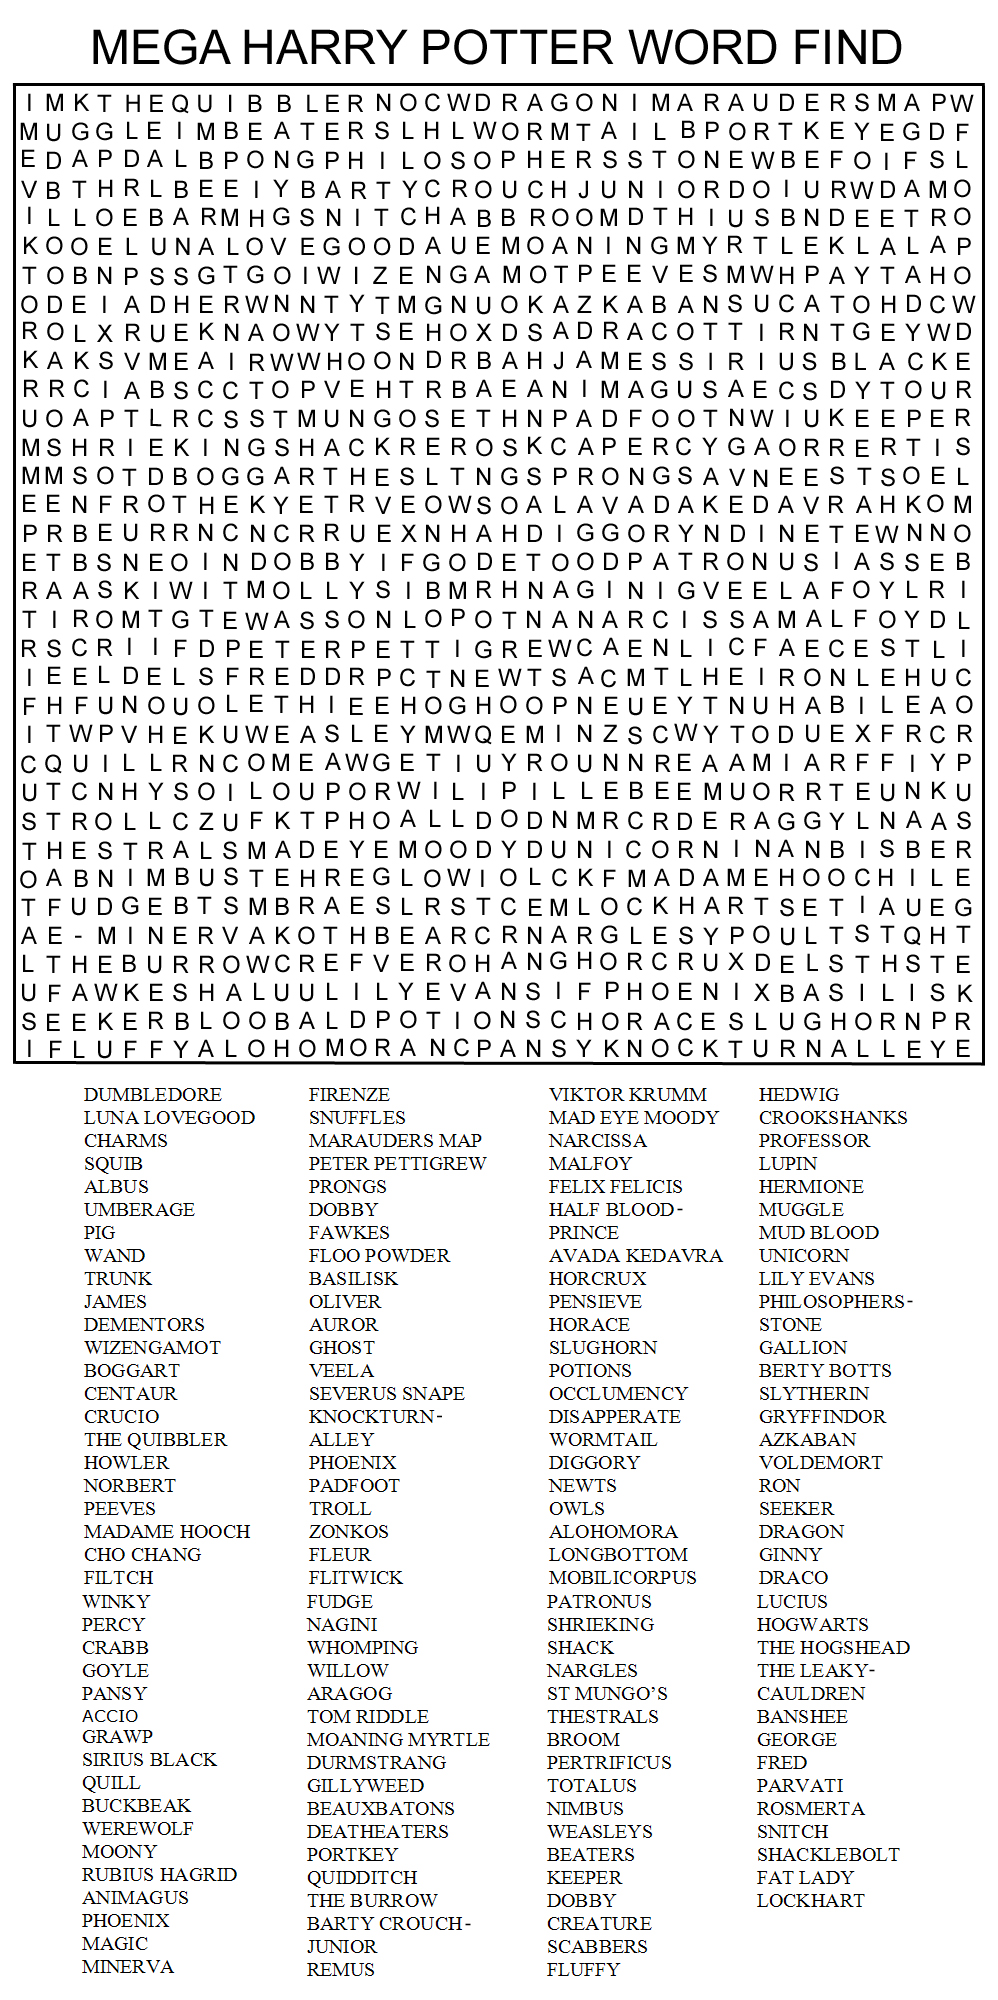 MEGA HARRY POTTER WORD FIND by Kinky-chichi on DeviantArt Inside Word Sleuth Template